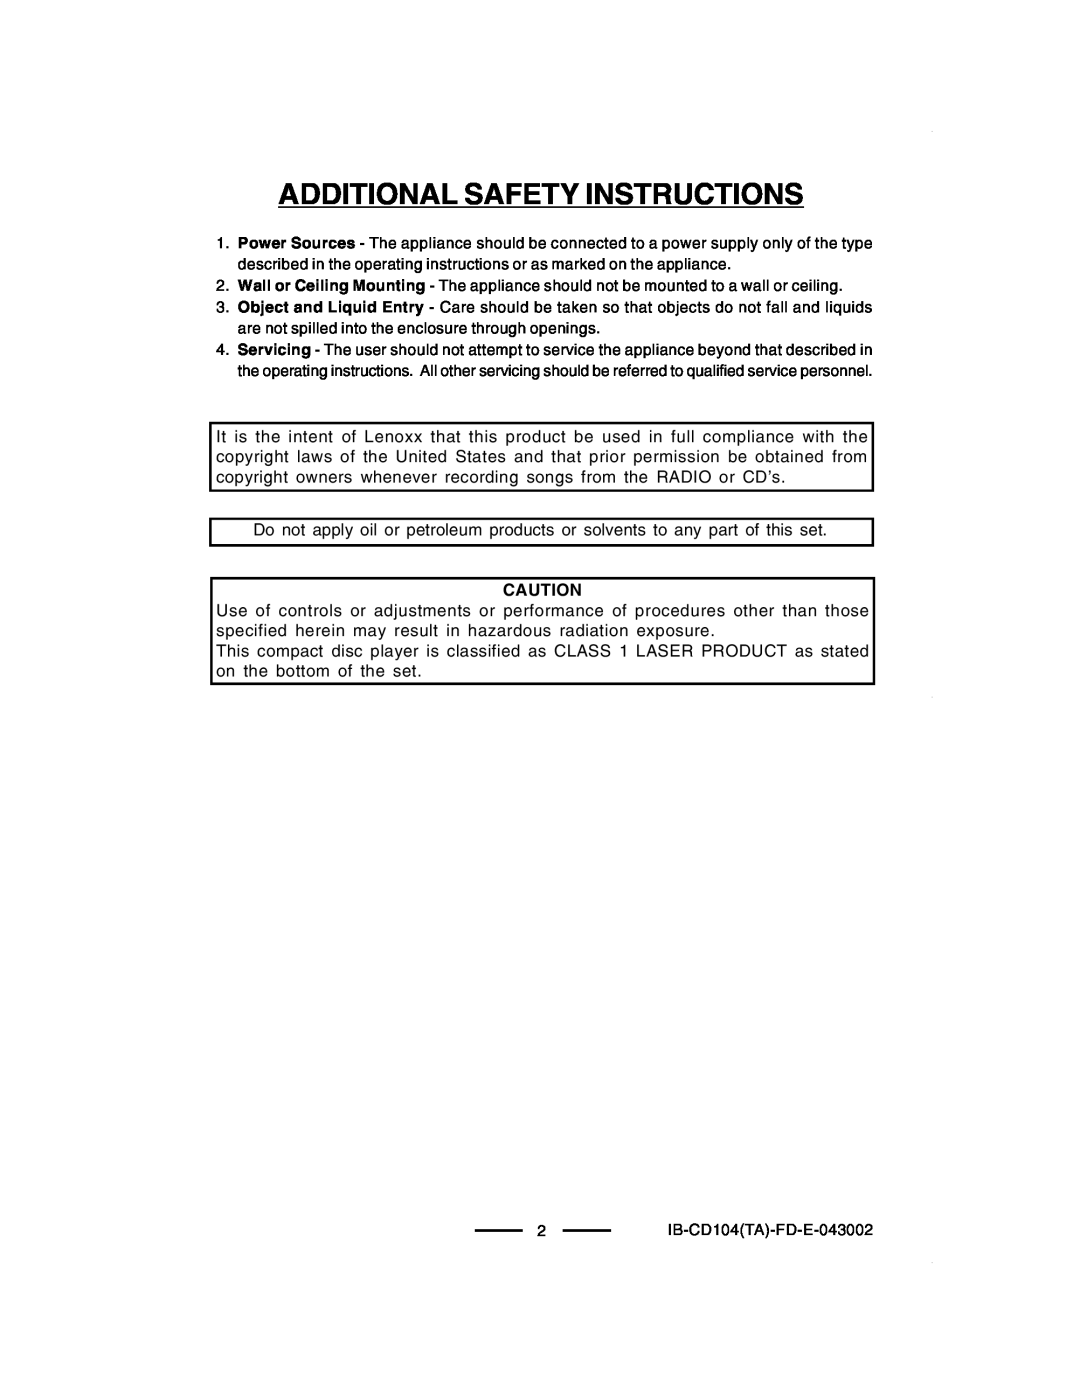 Lenoxx Electronics CD-104 manual Additional Safety Instructions 